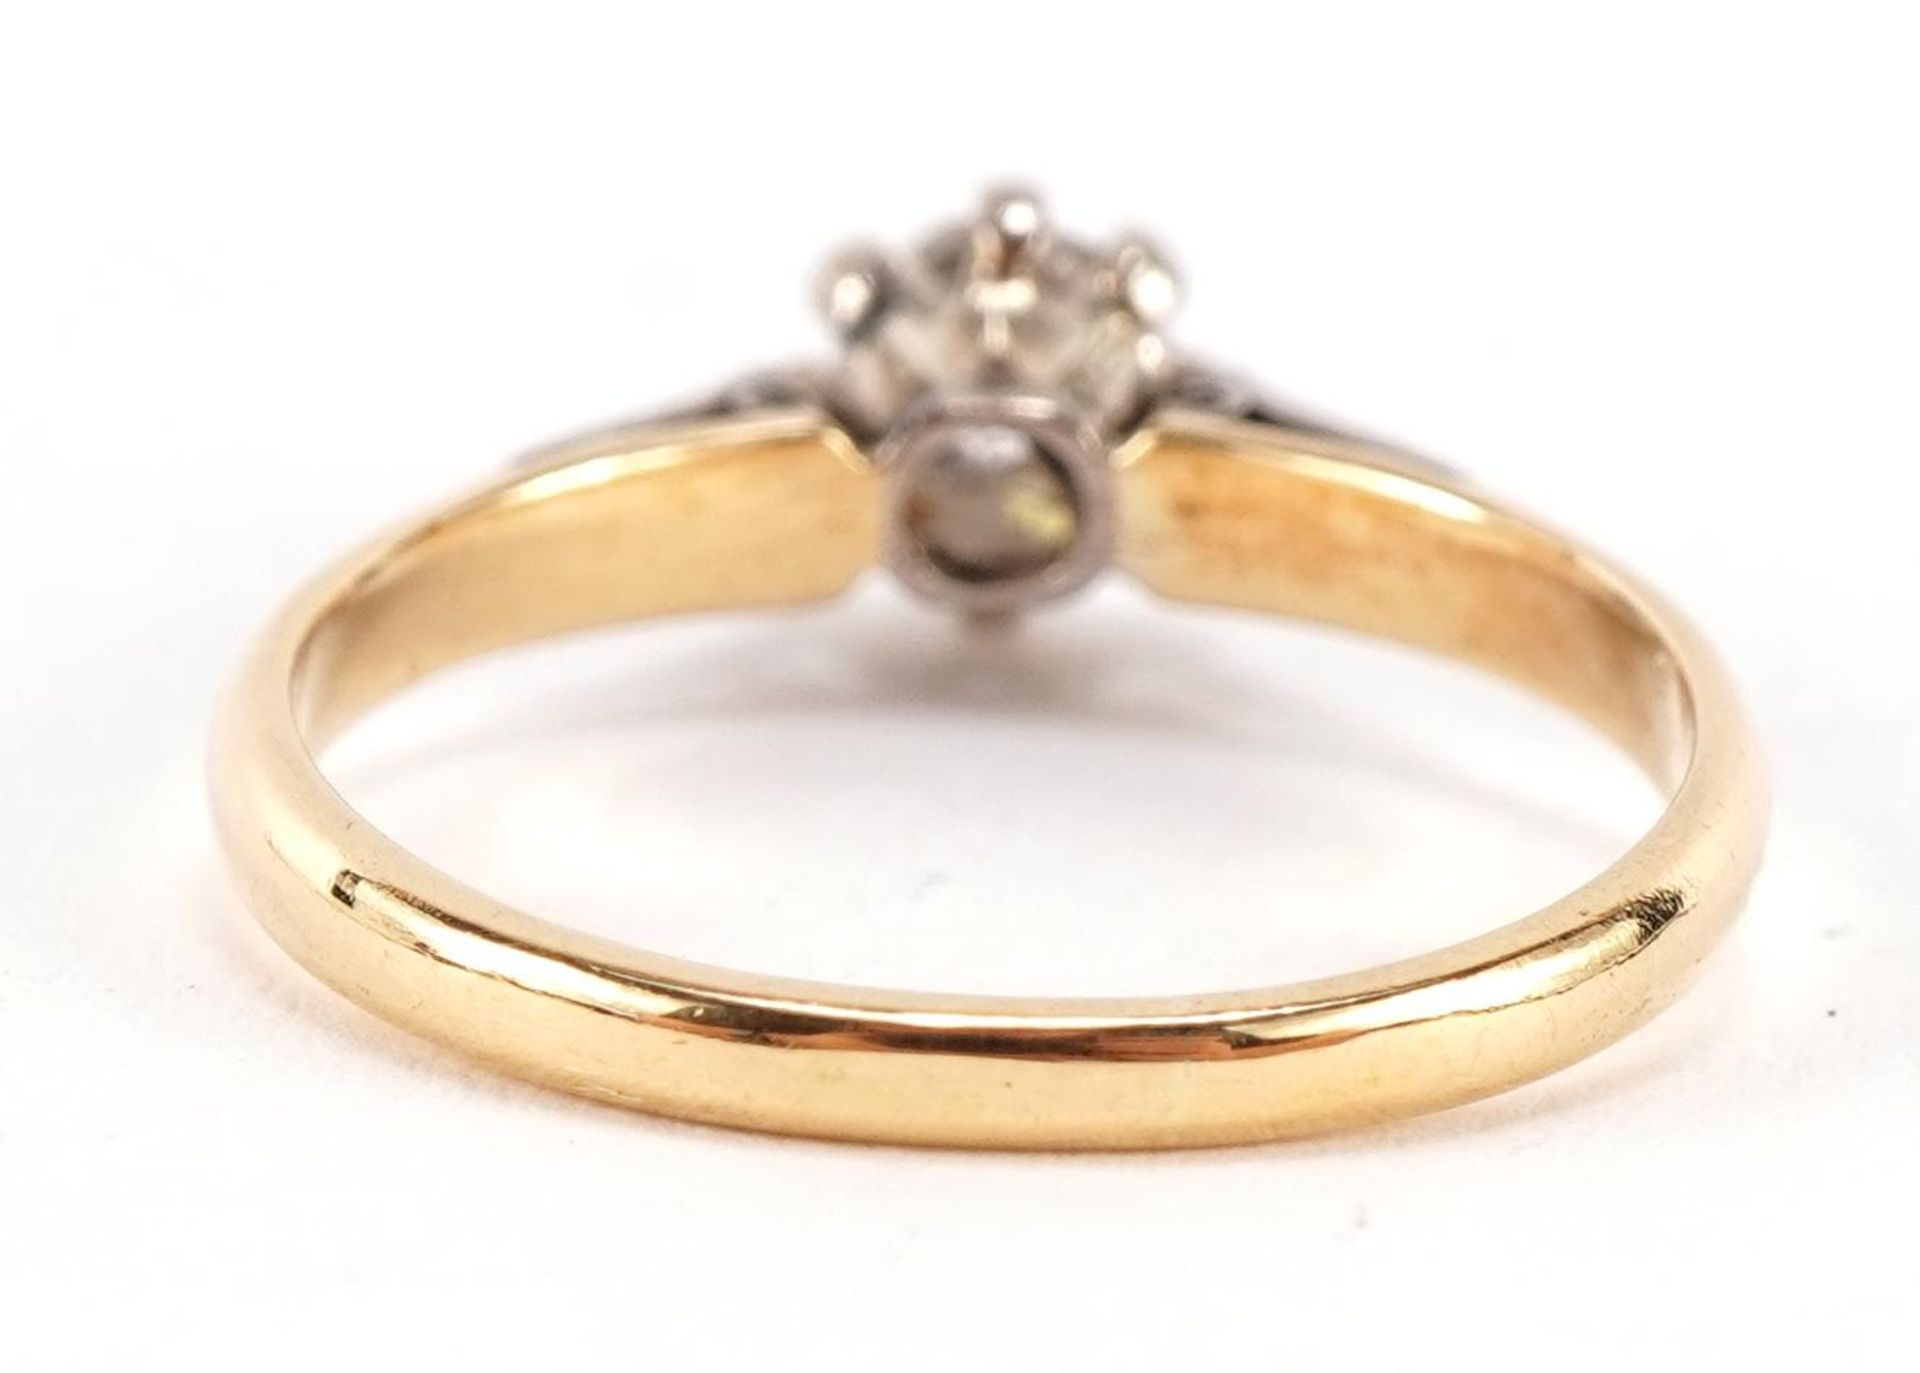 18ct gold diamond solitaire ring with diamond set shoulders, the central diamond approximately 4.9mm - Image 2 of 5